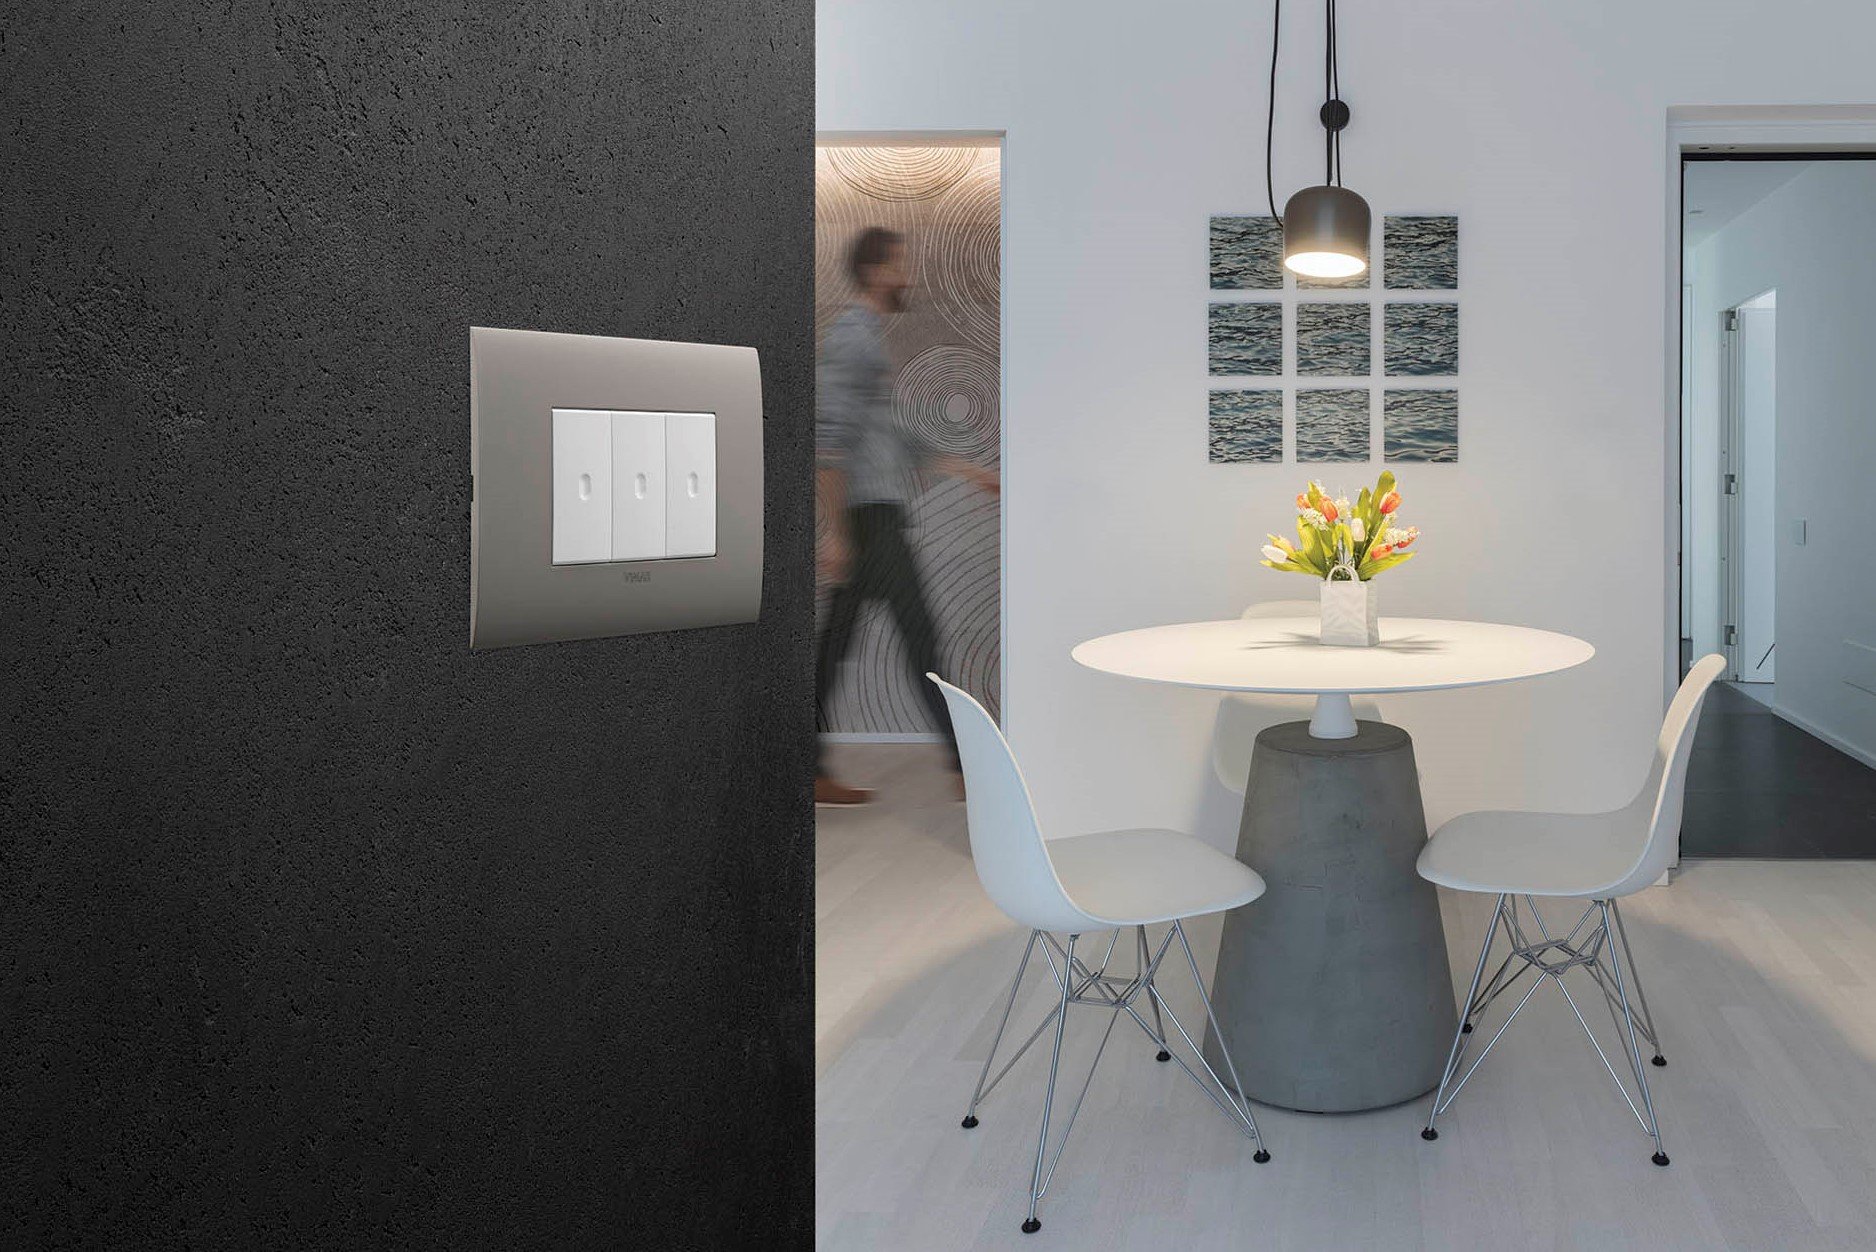 Arké fit. Subtle on any wall. Connected in any home.